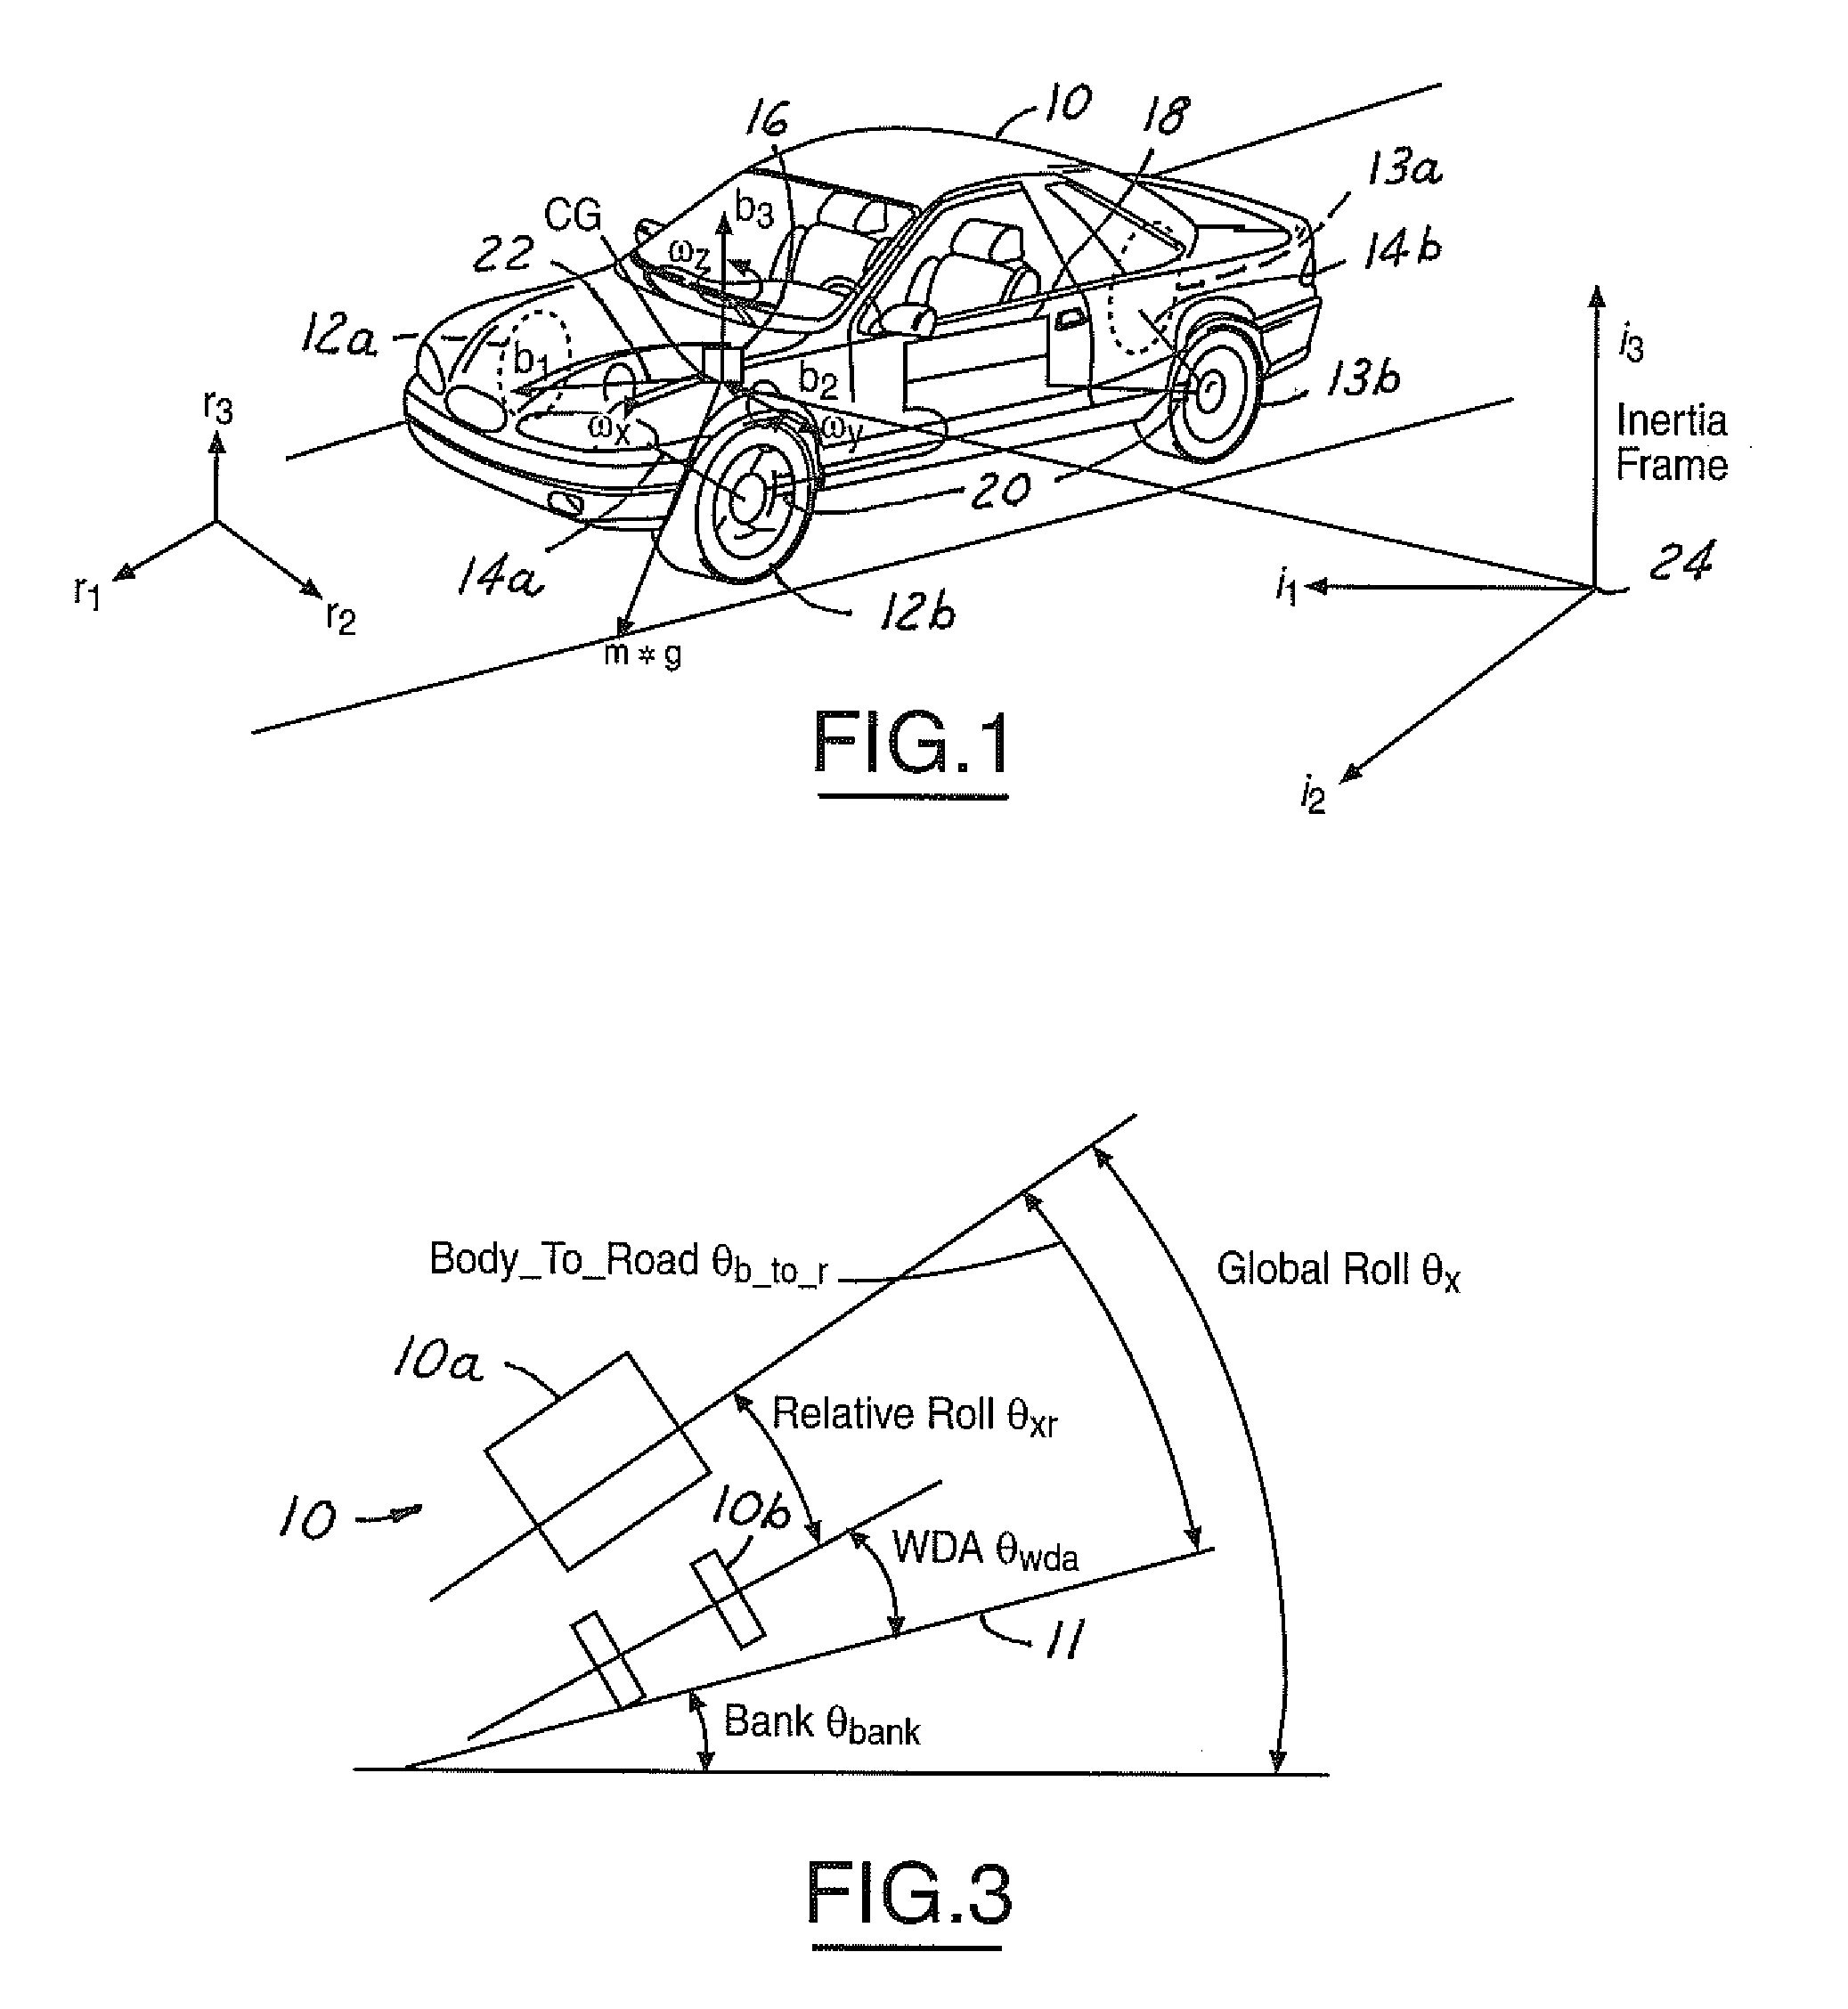 Roll stability control system for an automotive vehicle using an external environmental sensing system